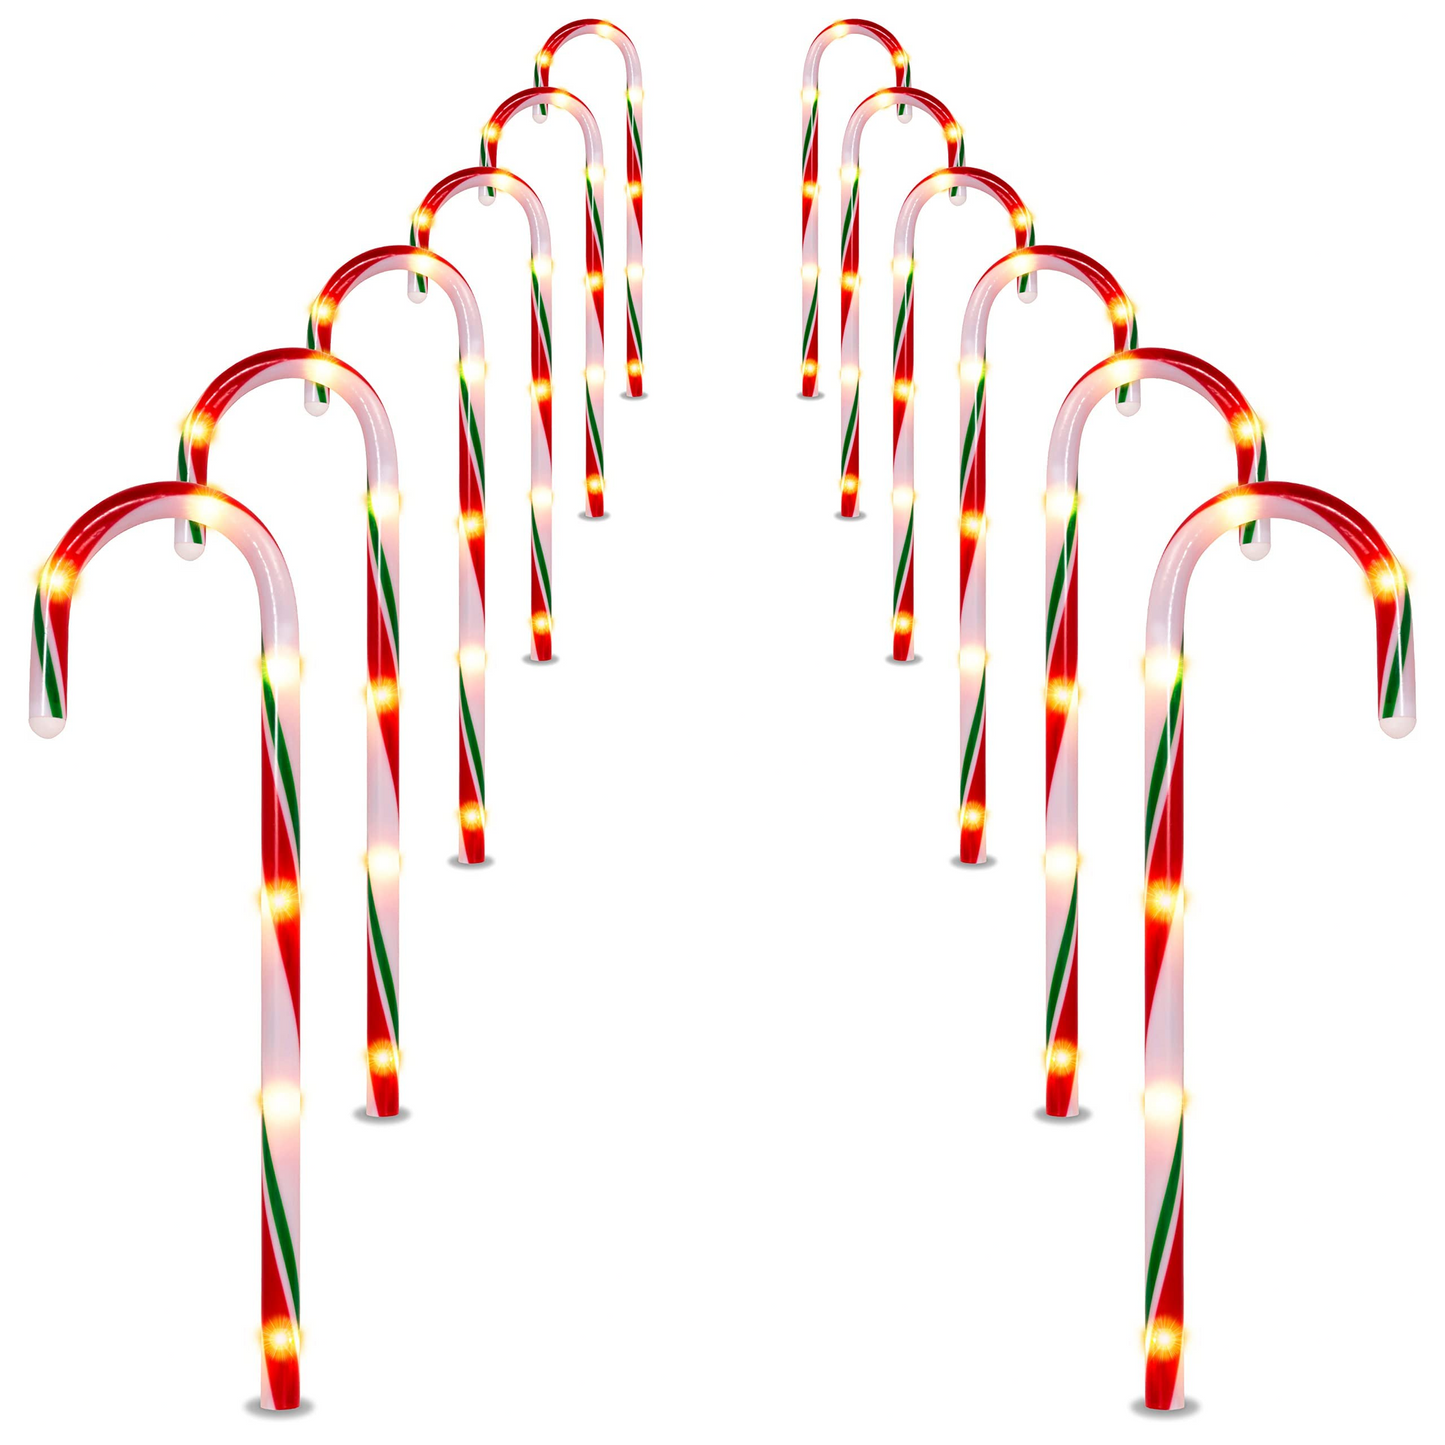 Christmas Candy Cane Pathway Markers, Set of 12 Thin Green